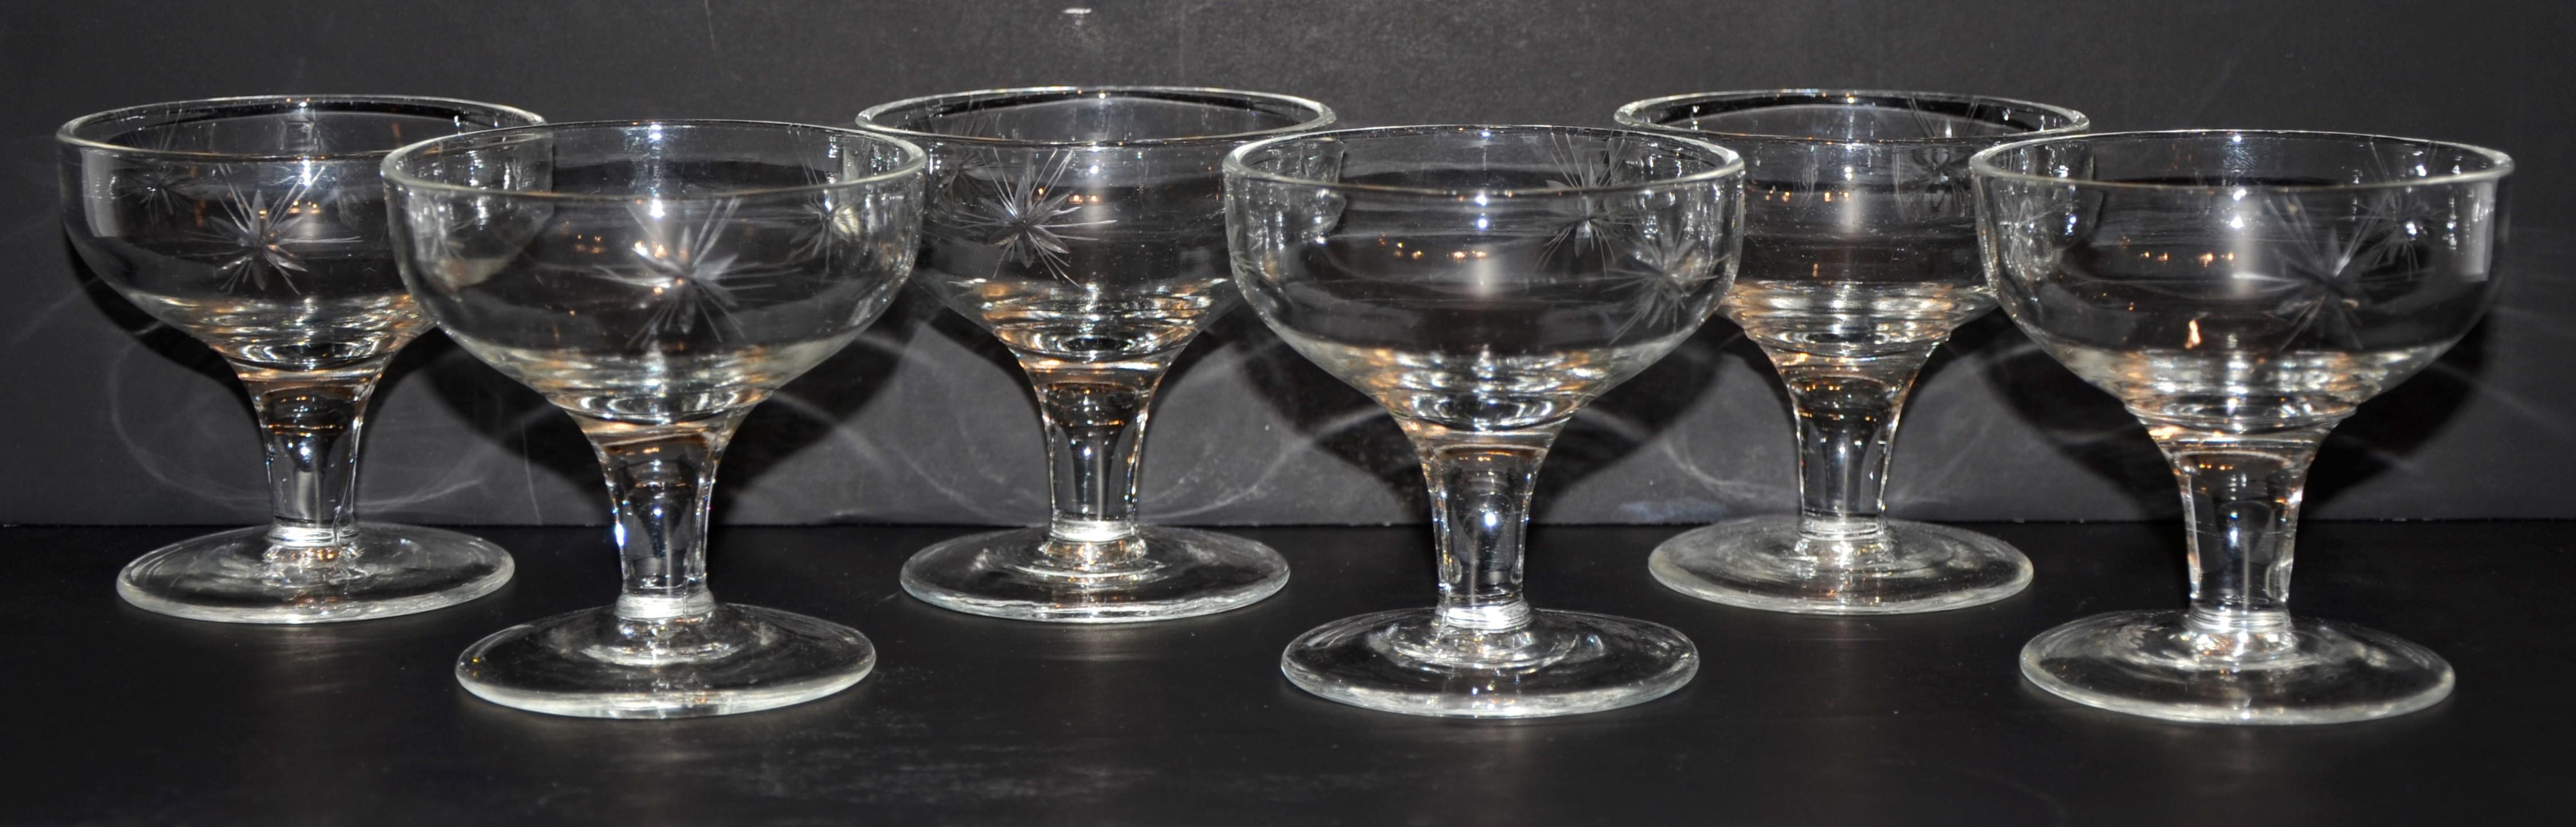 American Set of 6 Starburst Etched Glass Champagne Coupe Glasses For Sale